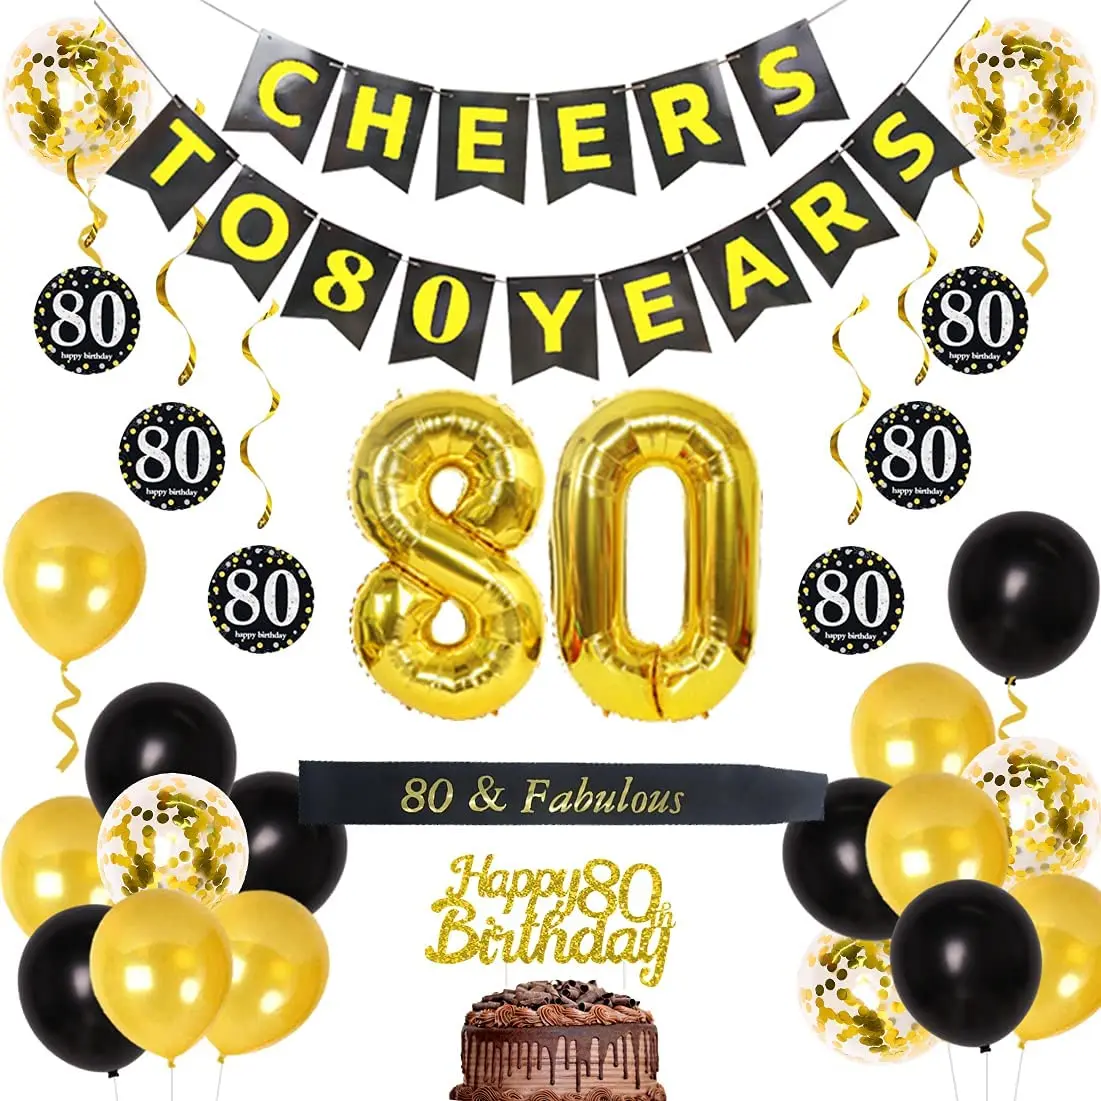 80th Birthday Decorations Black Gold 80 Year Old Birthday Party Supplies with Cheers to 80 Years Banner, 80th Hanging Swirls,